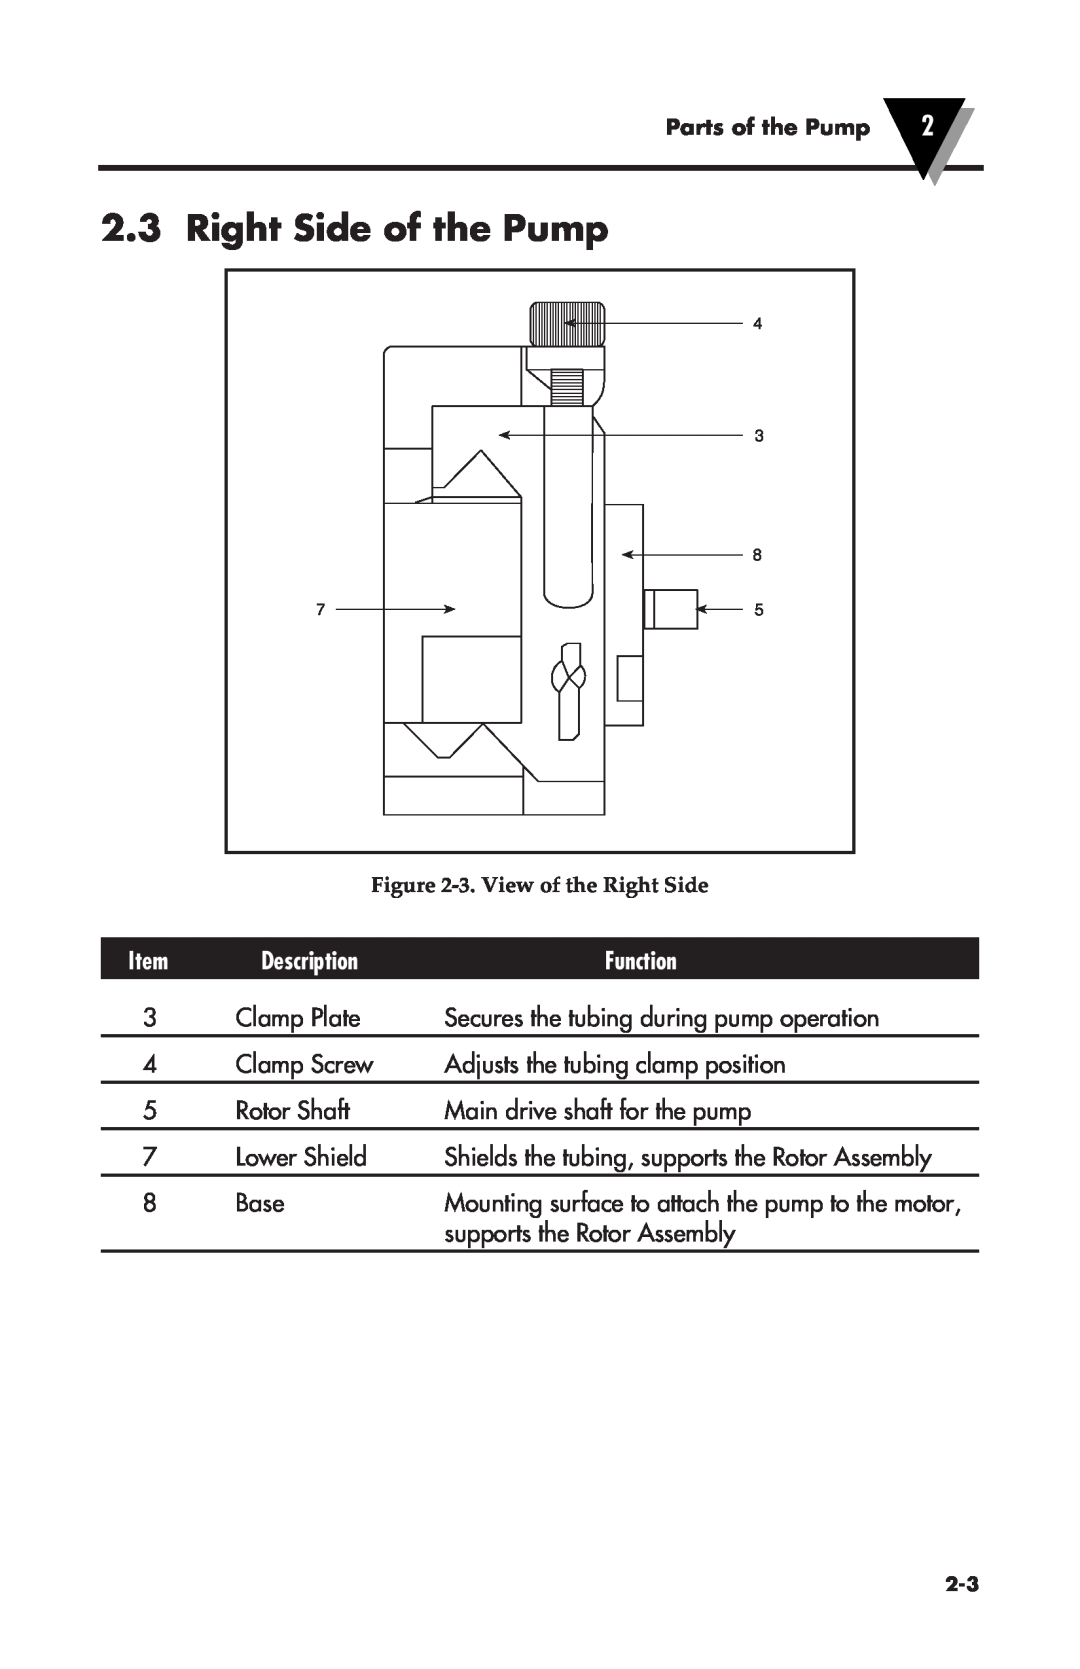 Omega Vehicle Security FPU500 manual Right Side of the Pump, Description, Function, Parts of the Pump 